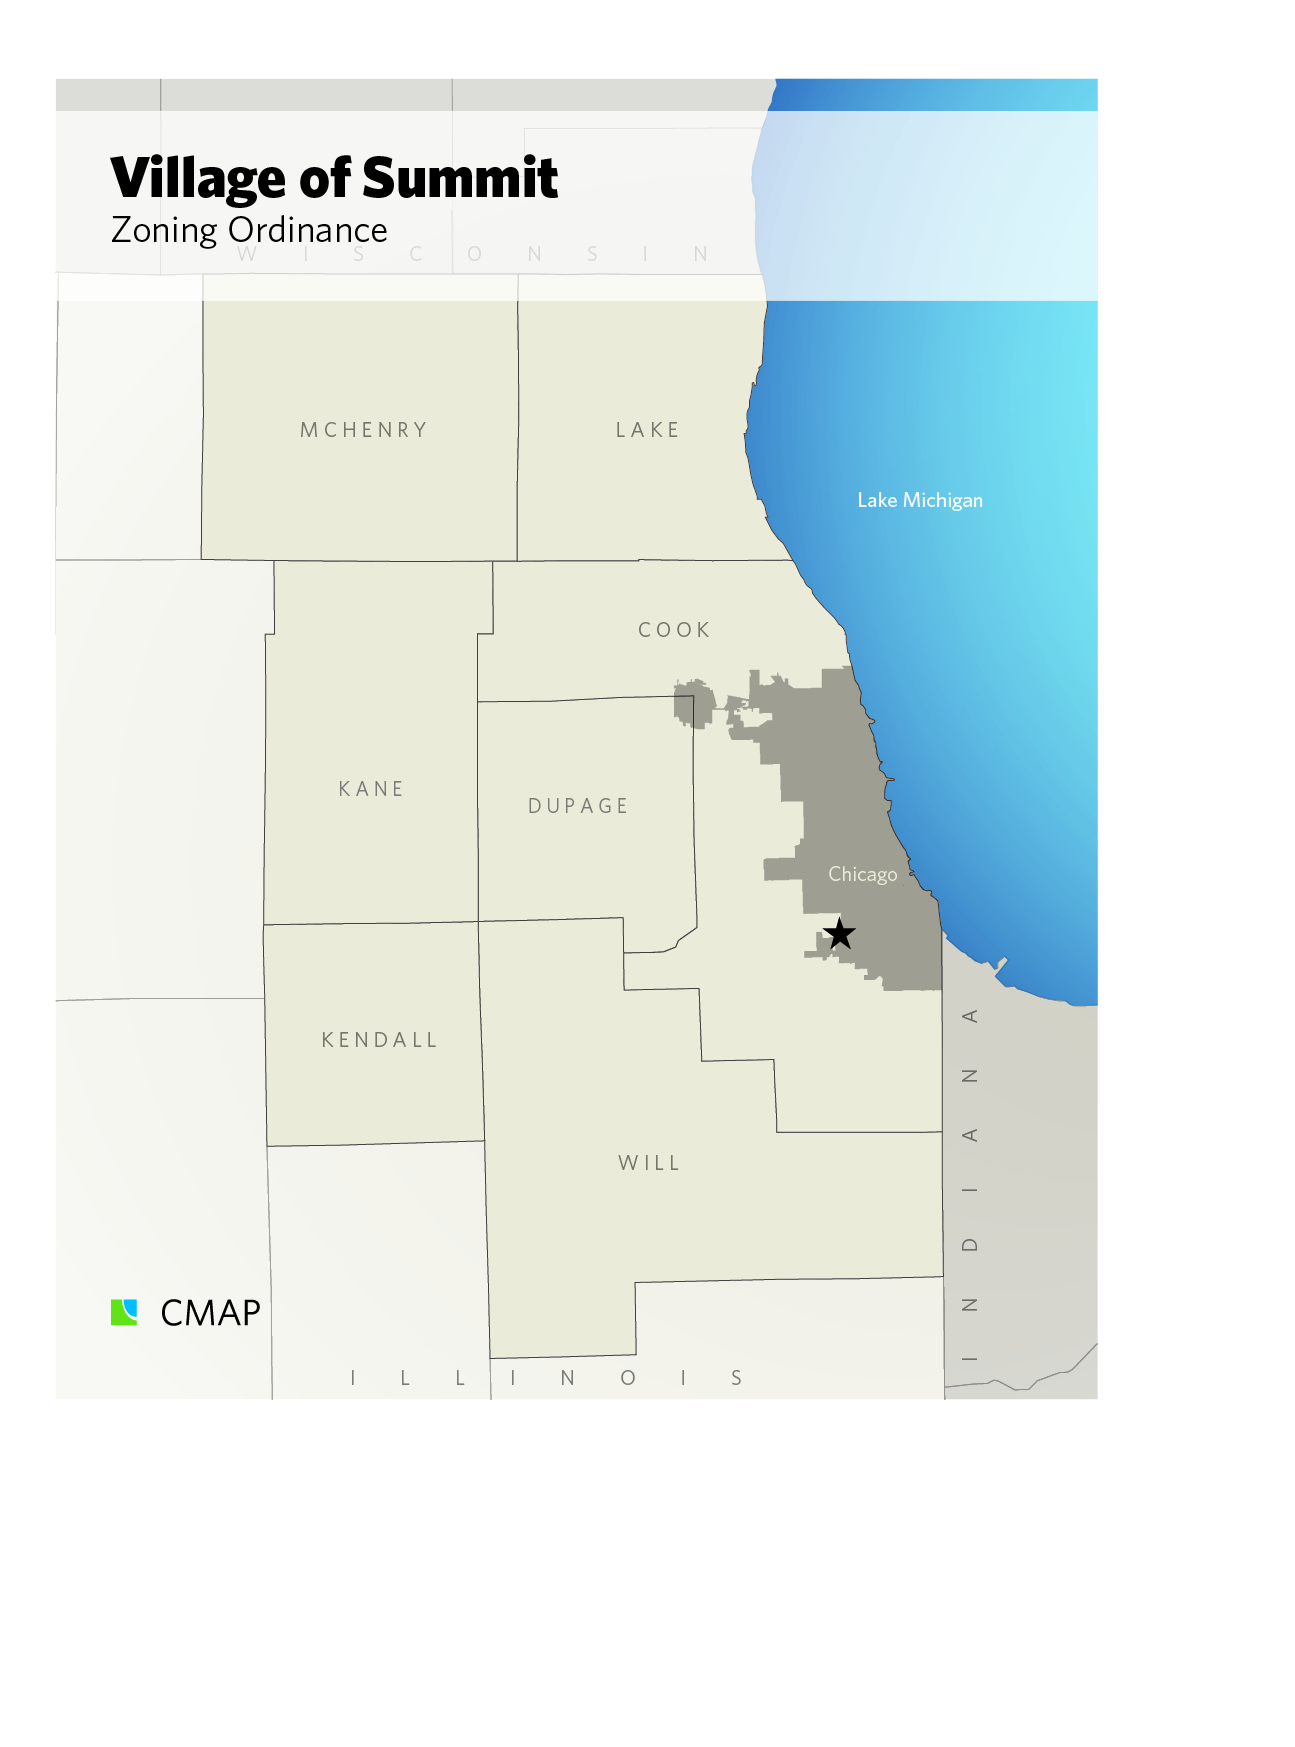 Map locating Summit within the Chicago region.